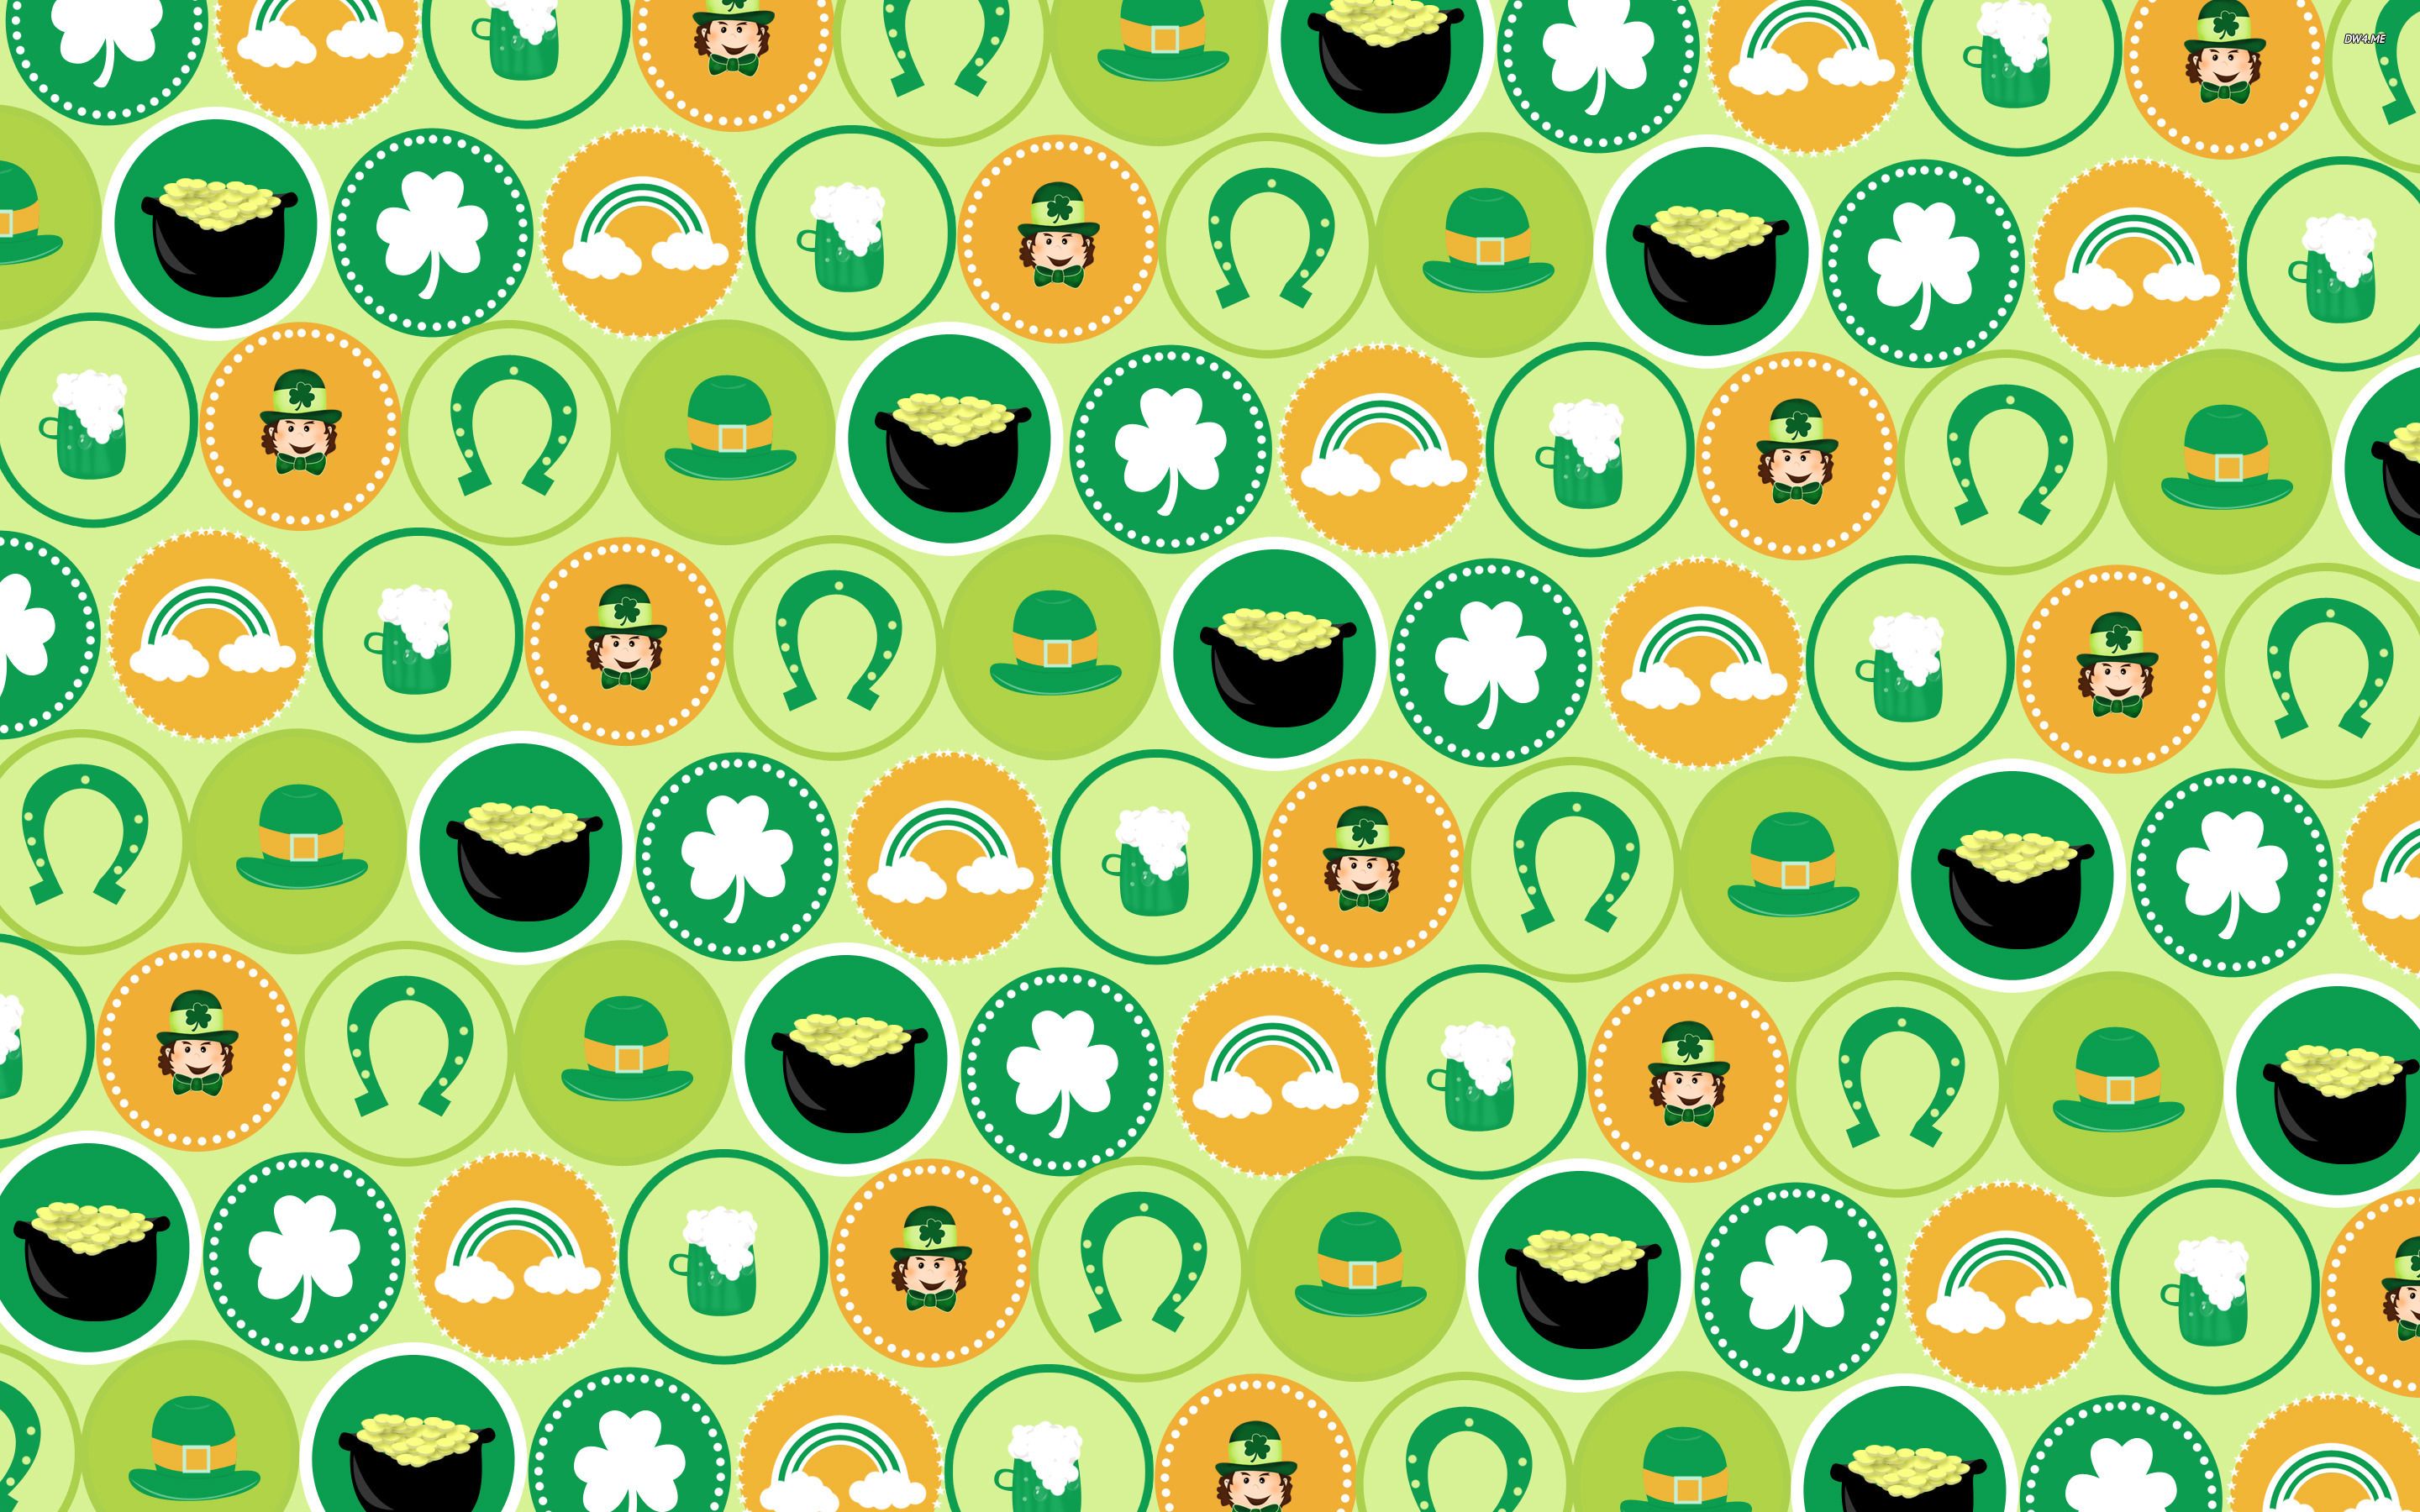 Patrick's Day Wallpaper For Computer St Patrick's Day